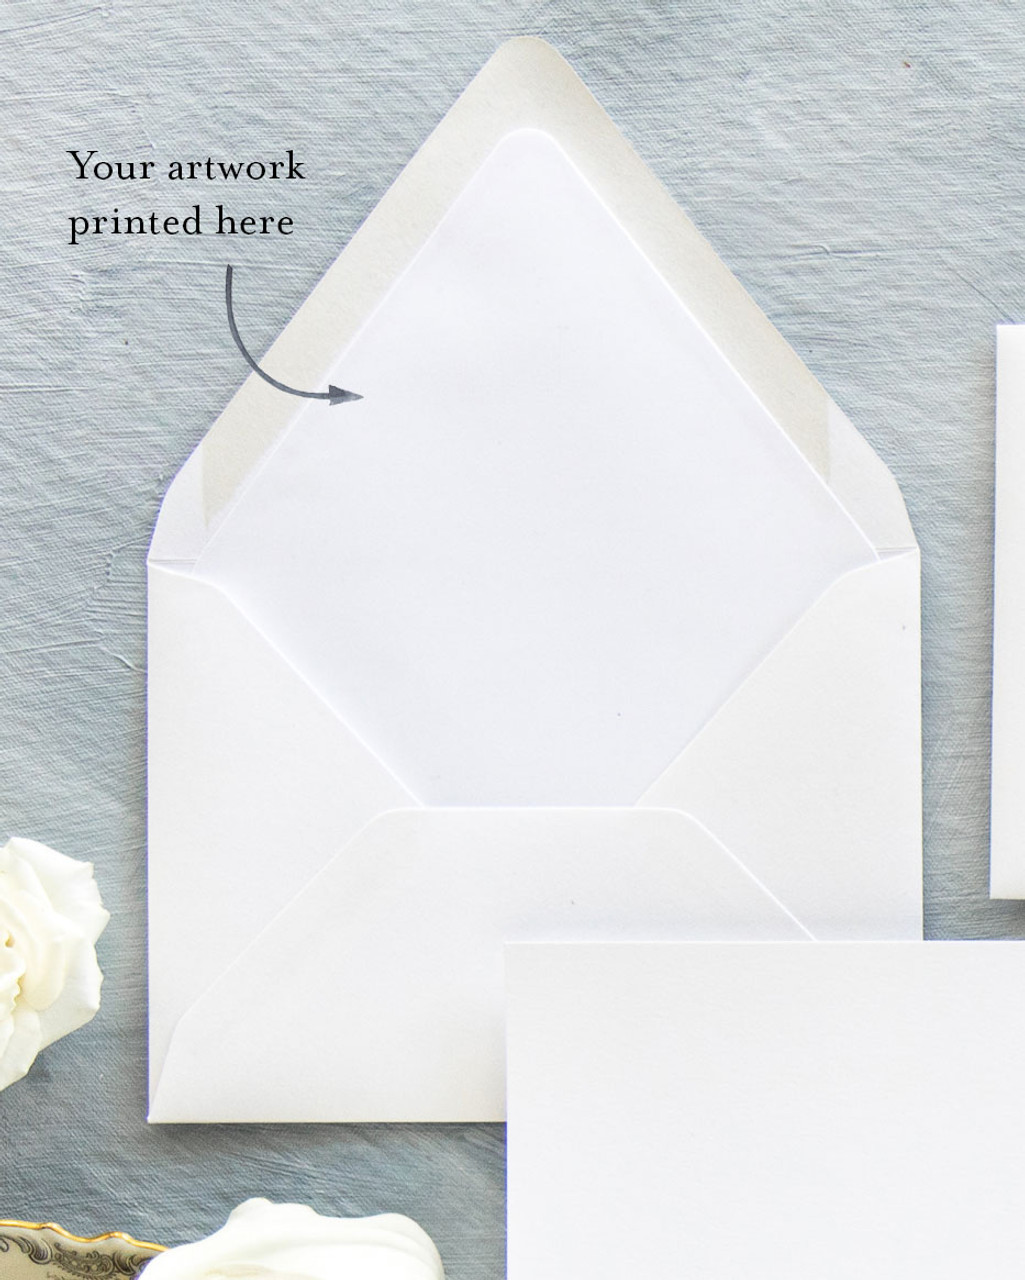 Print Your Own Design Outer A7.5 Euro Flap Envelope Liner